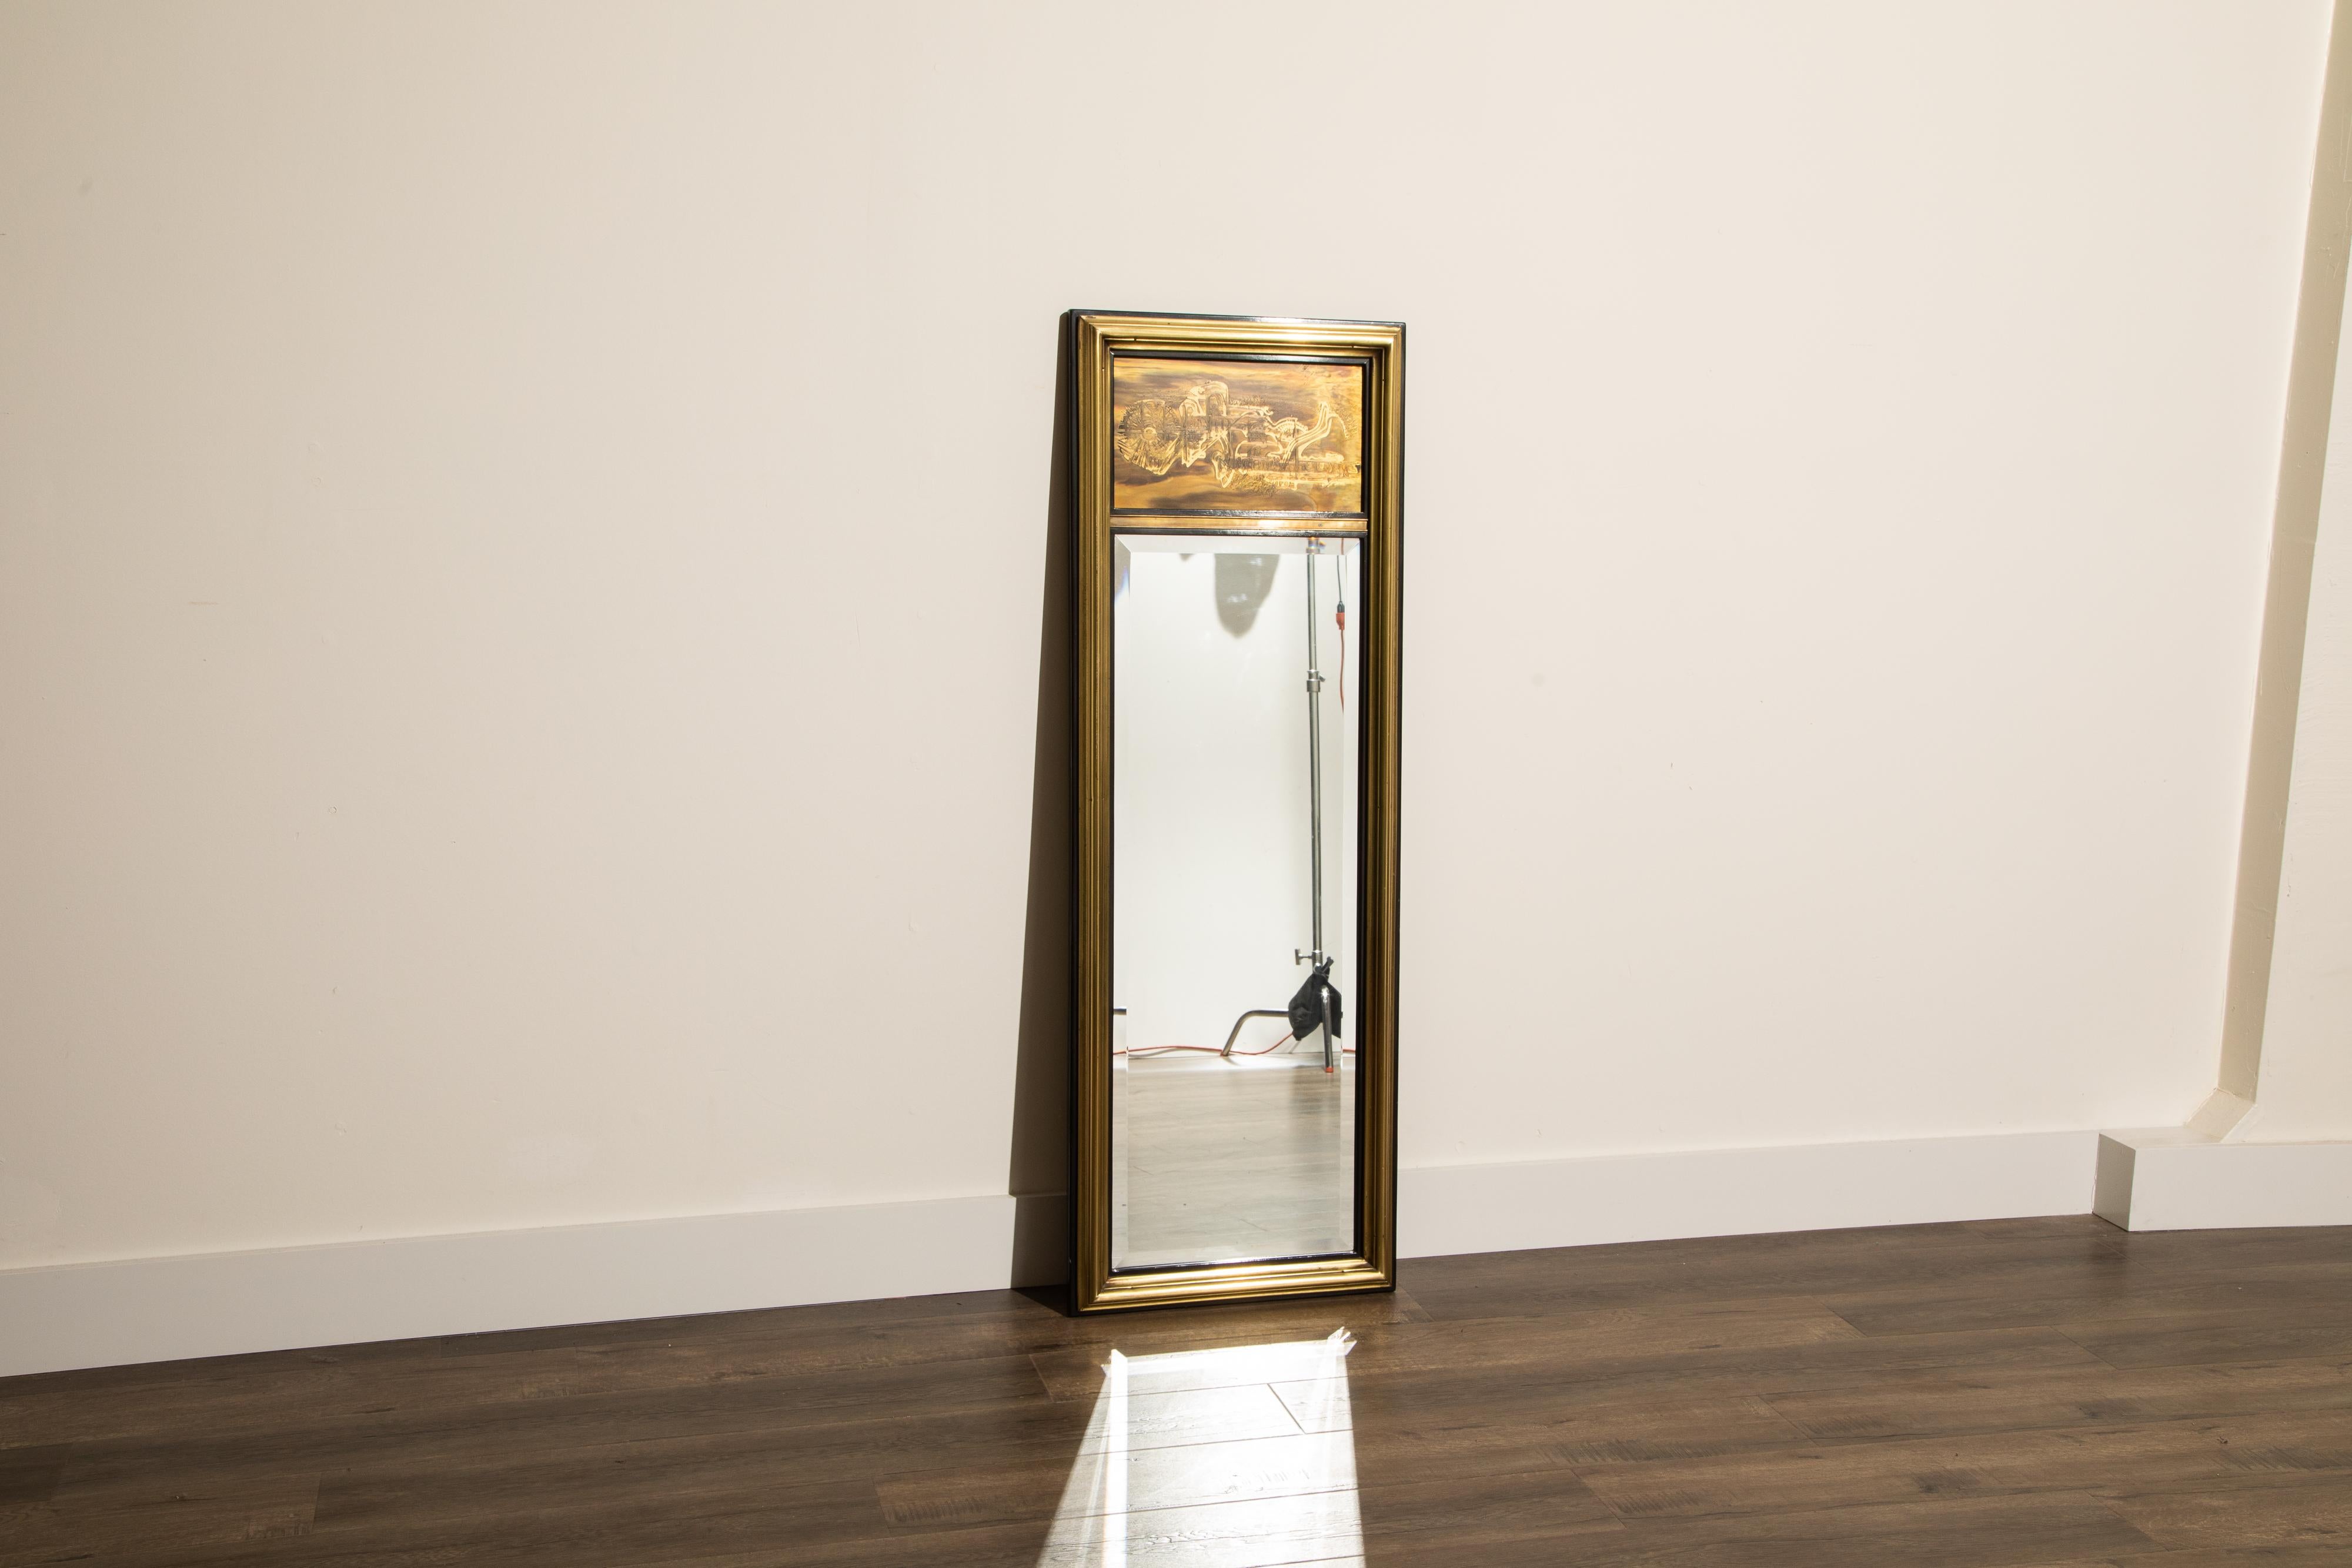 Exquisitely executed rectangular mirror by Bernhard Rohne for Mastercraft. Featuring black lacquered and acid etched wrapped brass panels by Bernhard Rohne displaying an abstract free-form design with beveled mirror. 

This beautiful Bernard Rohne